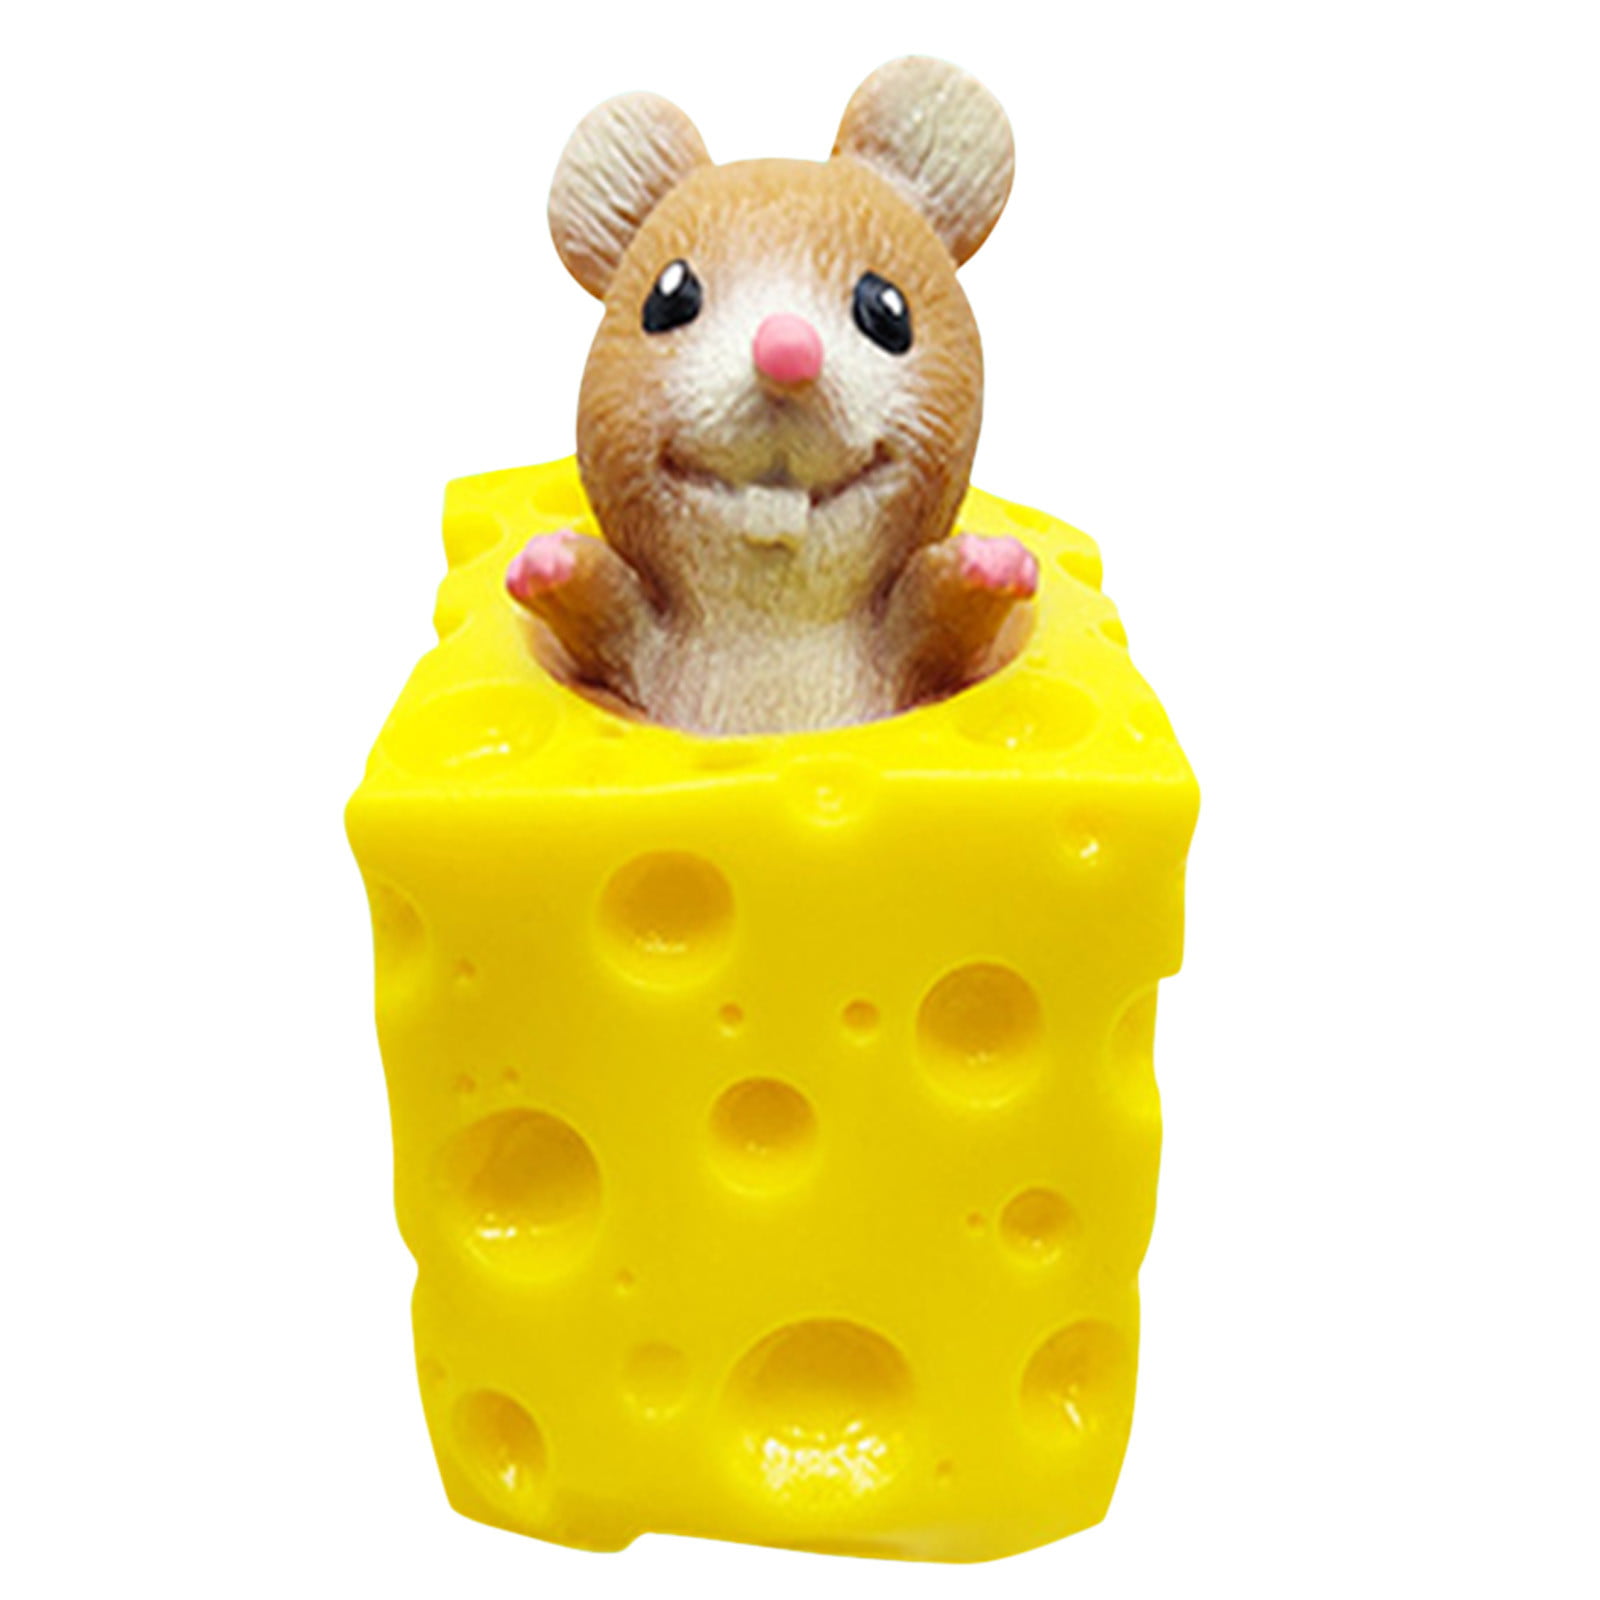 Mouse and Cheese Toy Hide and Seek Stress Relief Toy for Kid Adult SDLAJOLLA Fidget Toys 